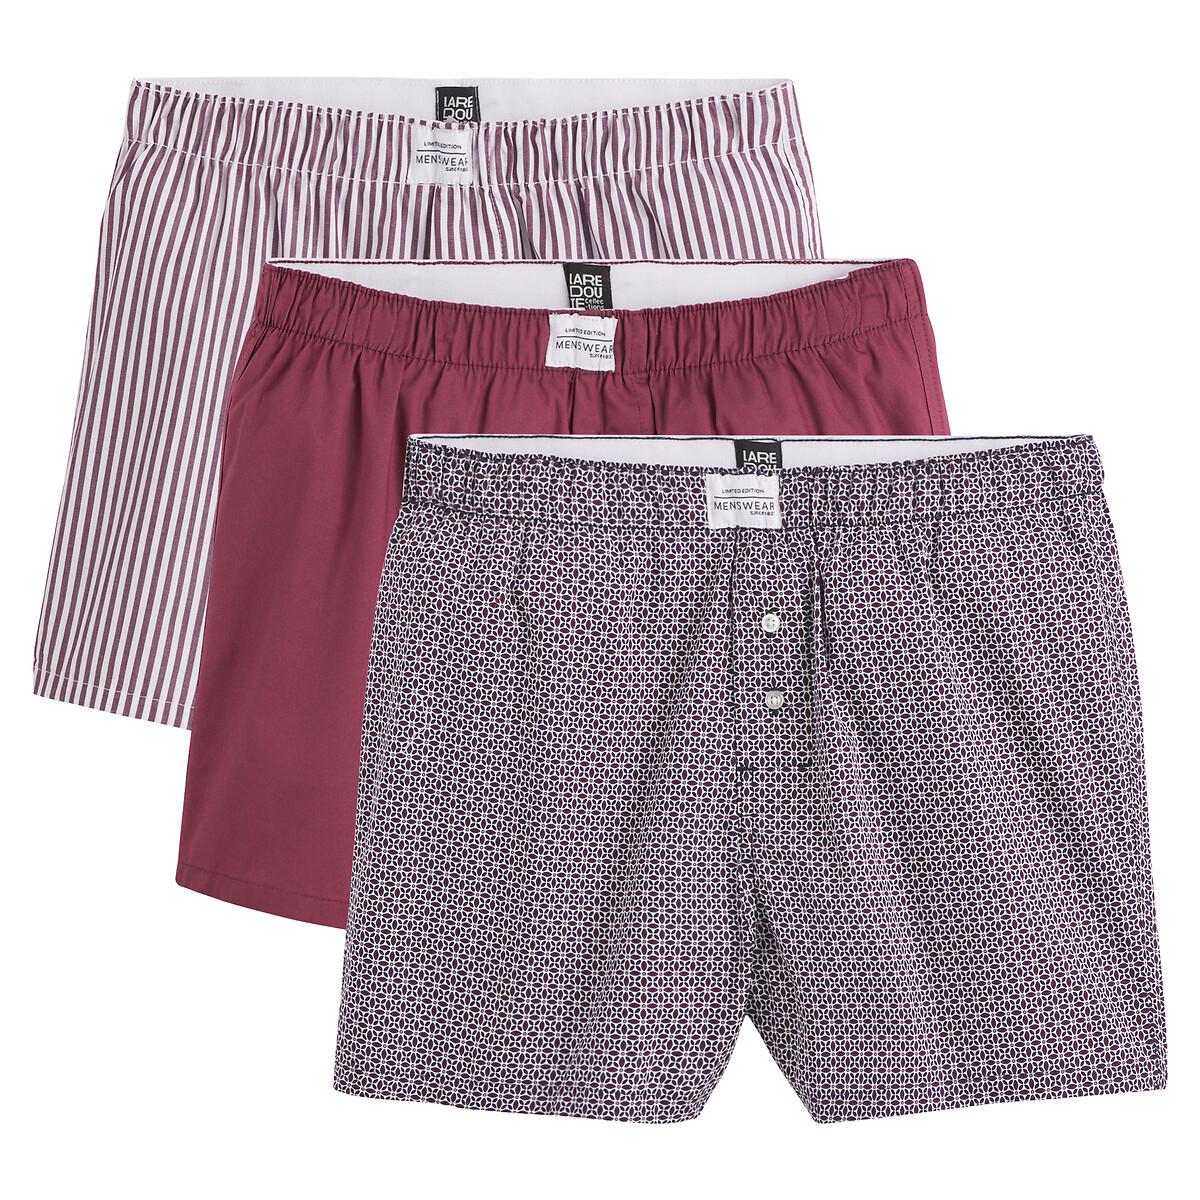 La Redoute Collections  3er-Pack Boxershorts 